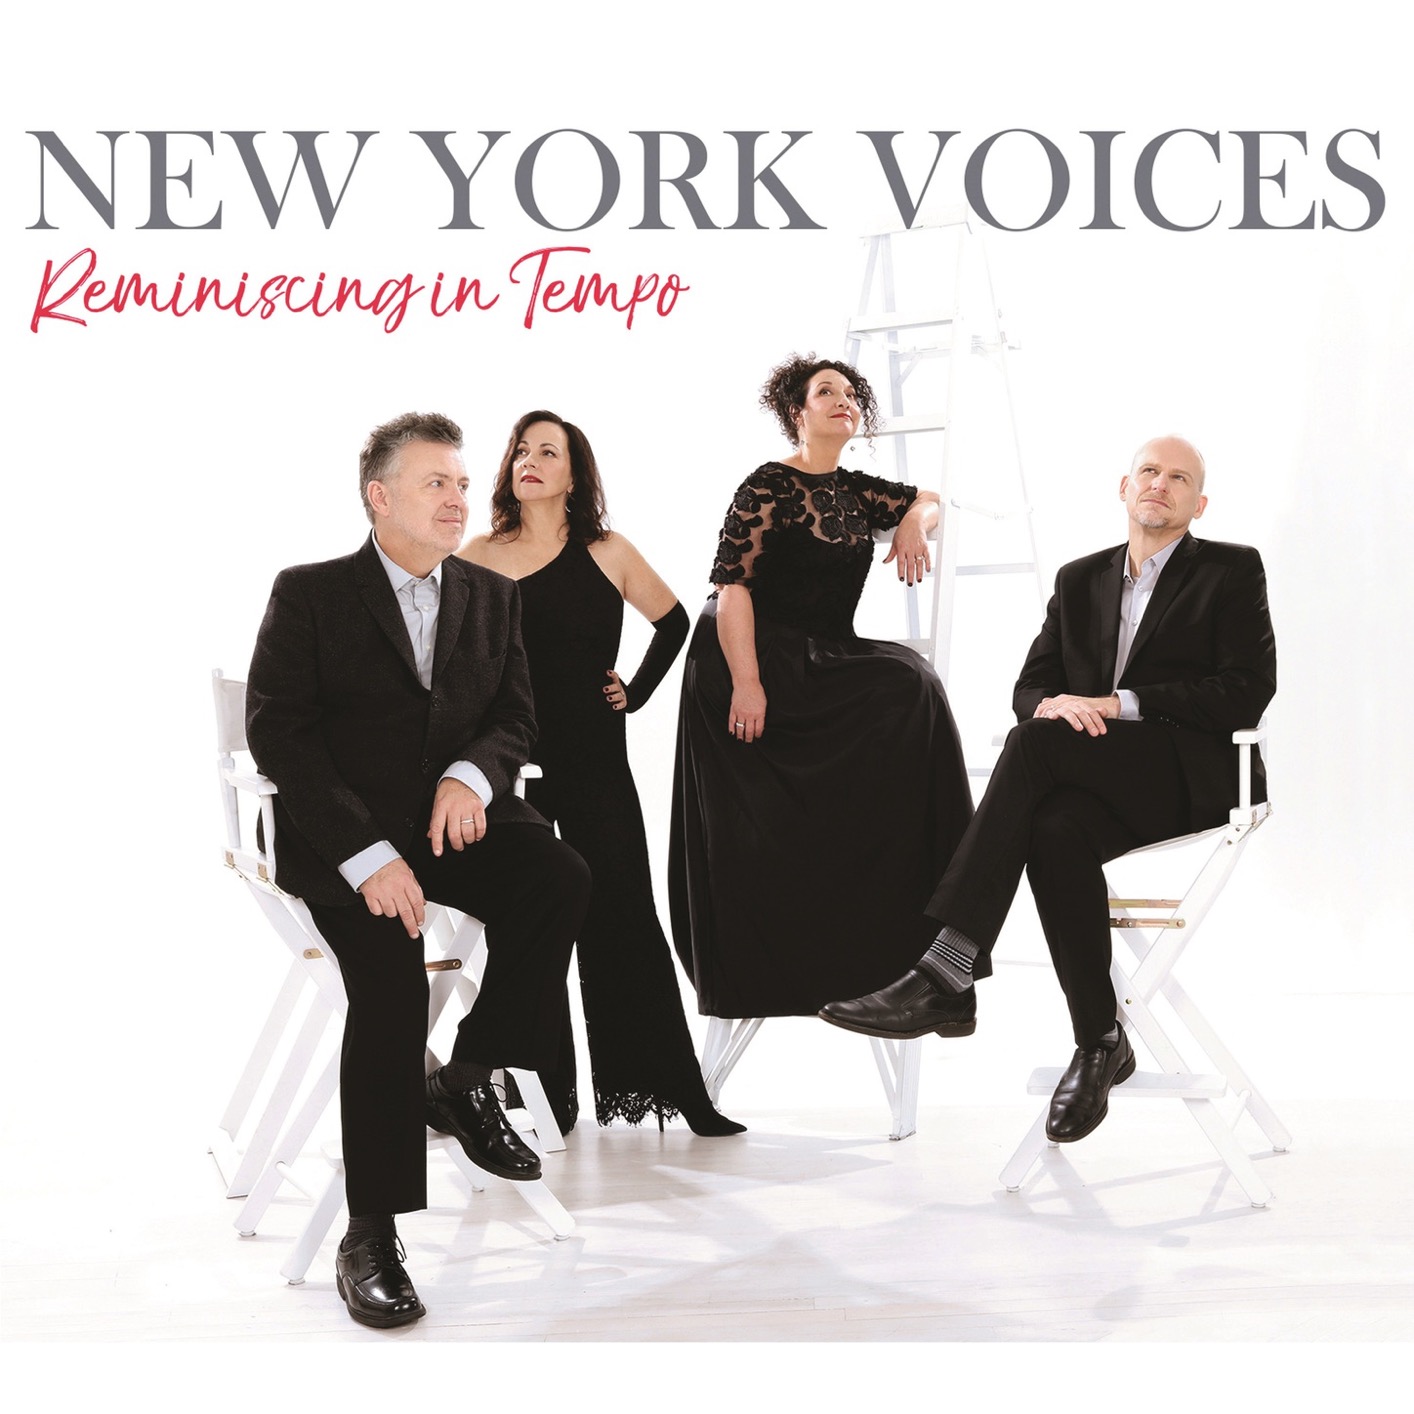 New York Voices – Reminiscing in Tempo (2019) [FLAC 24bit/96kHz]